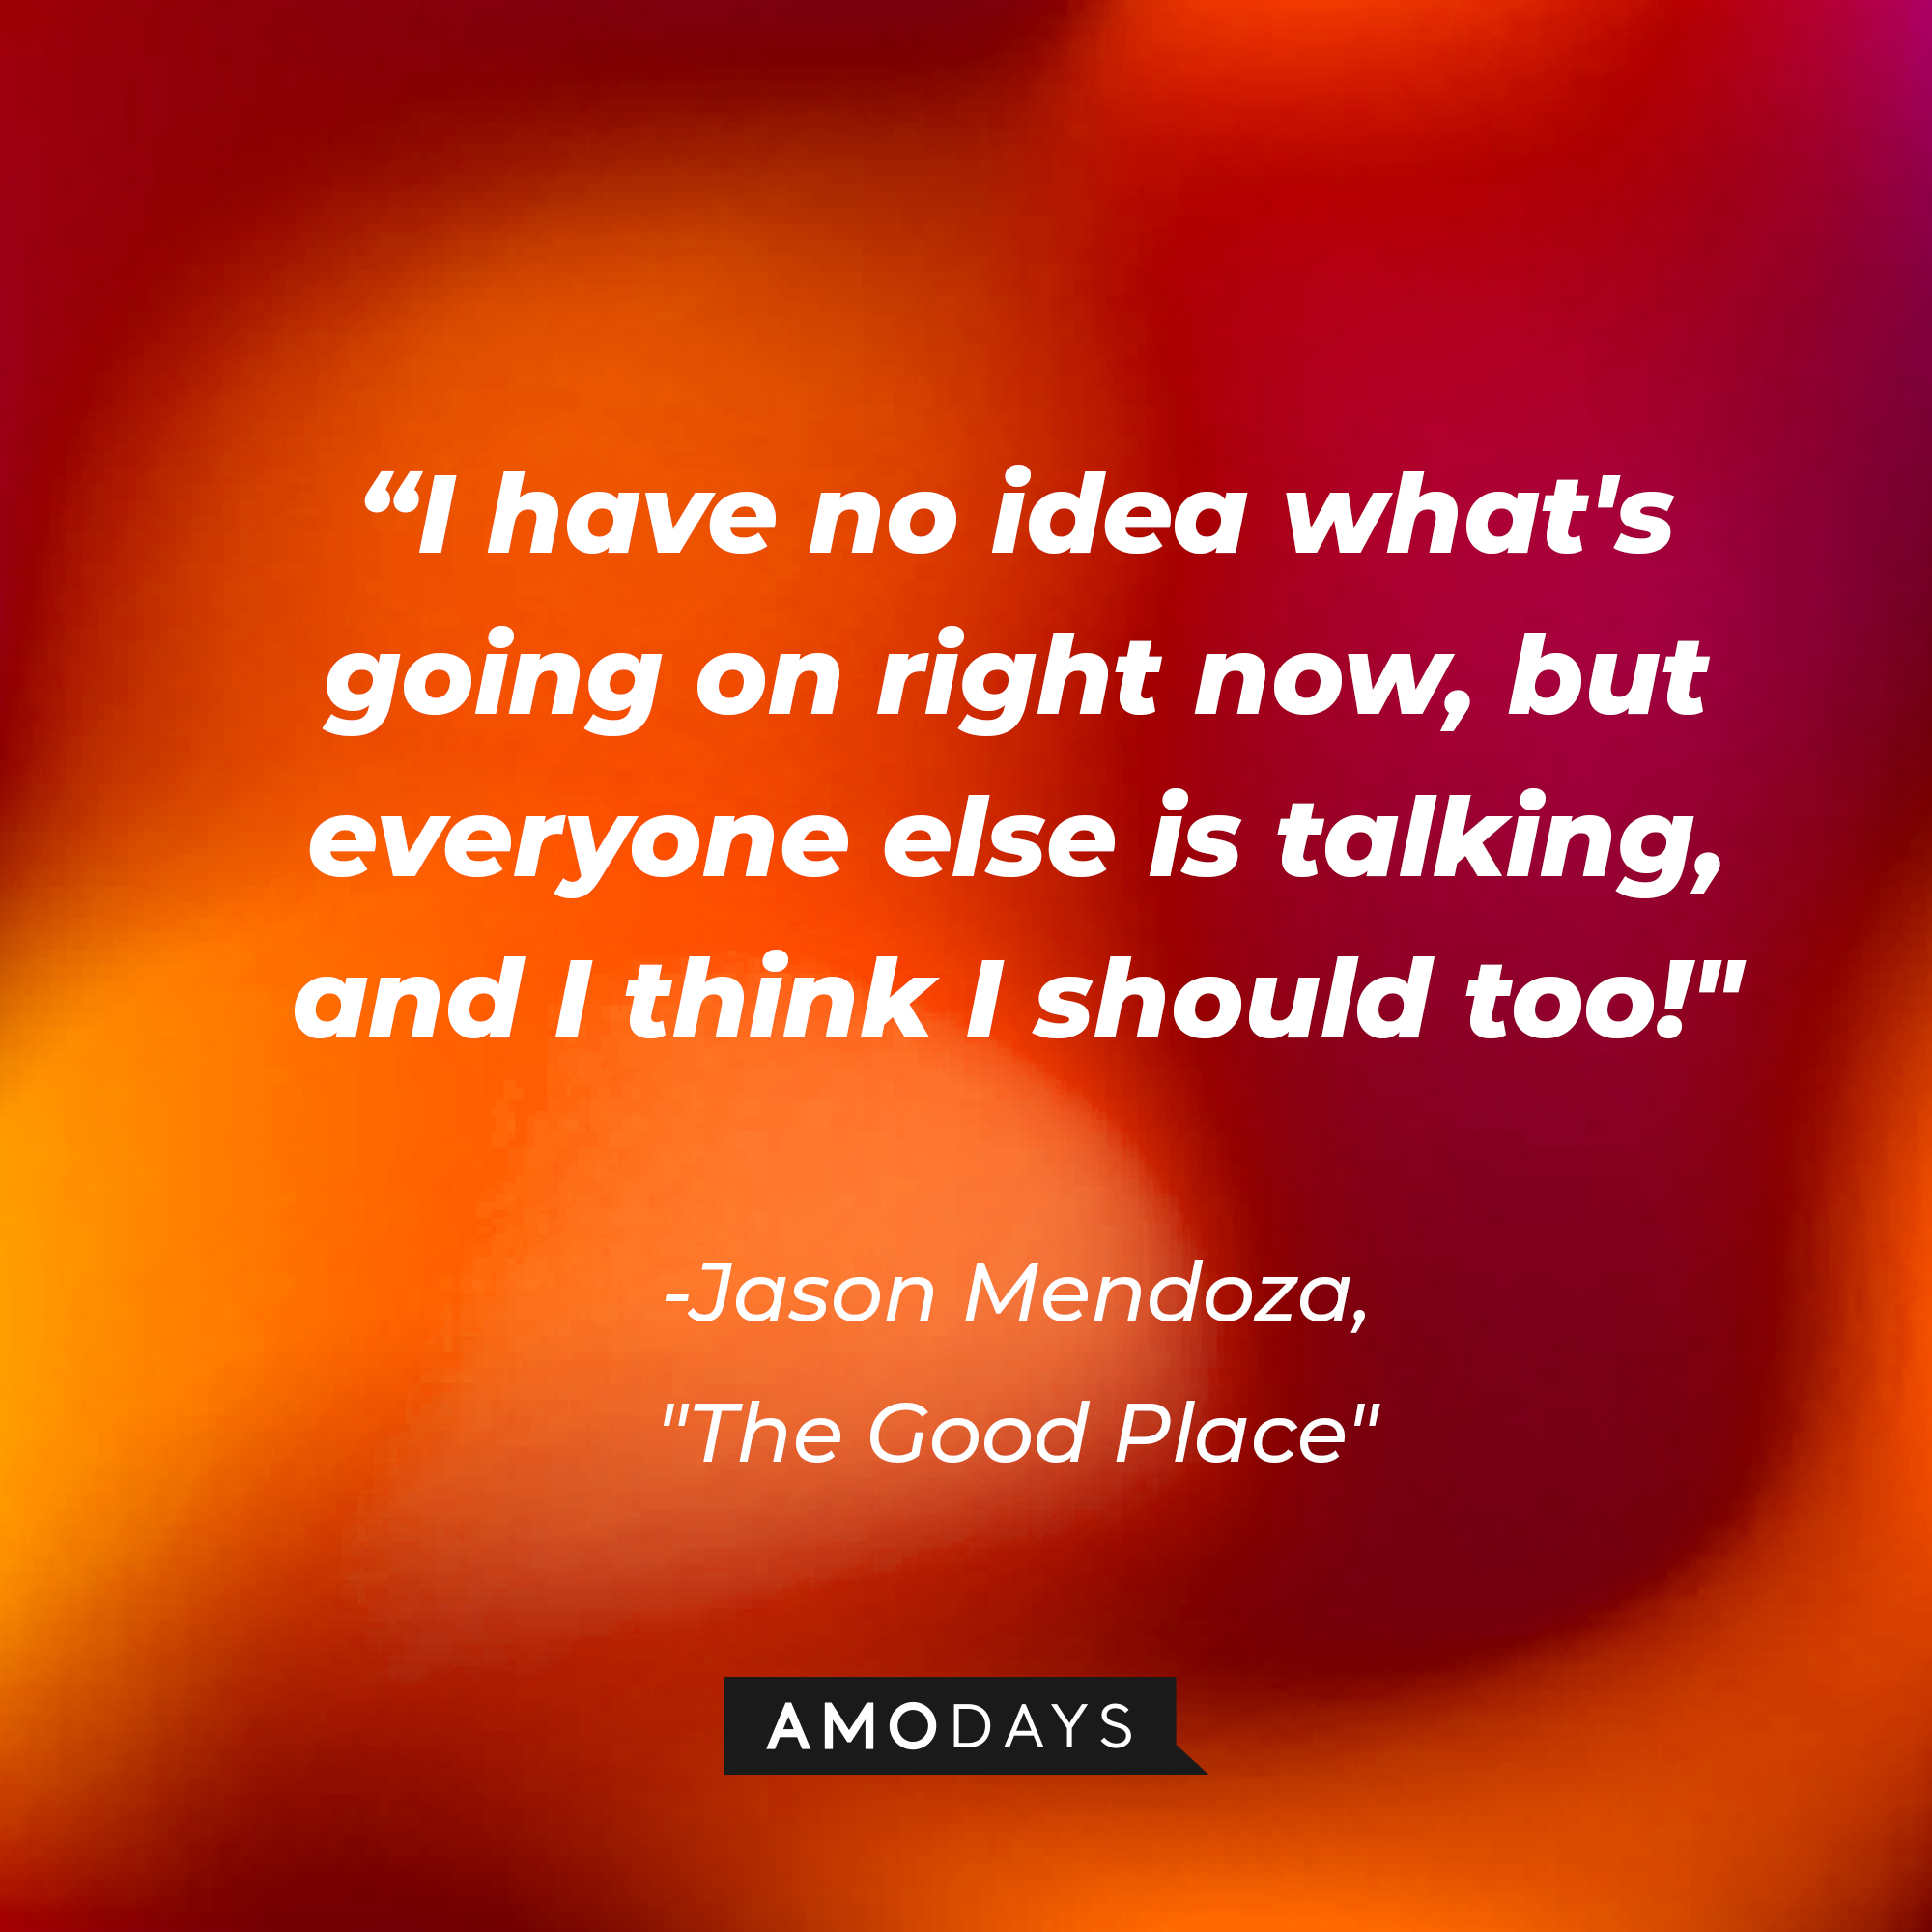 Jason Mendoza's quote in "The Good Place:" “I have no idea what's going on right now, but everyone else is talking, and I think I should too!” | Source: Amodays